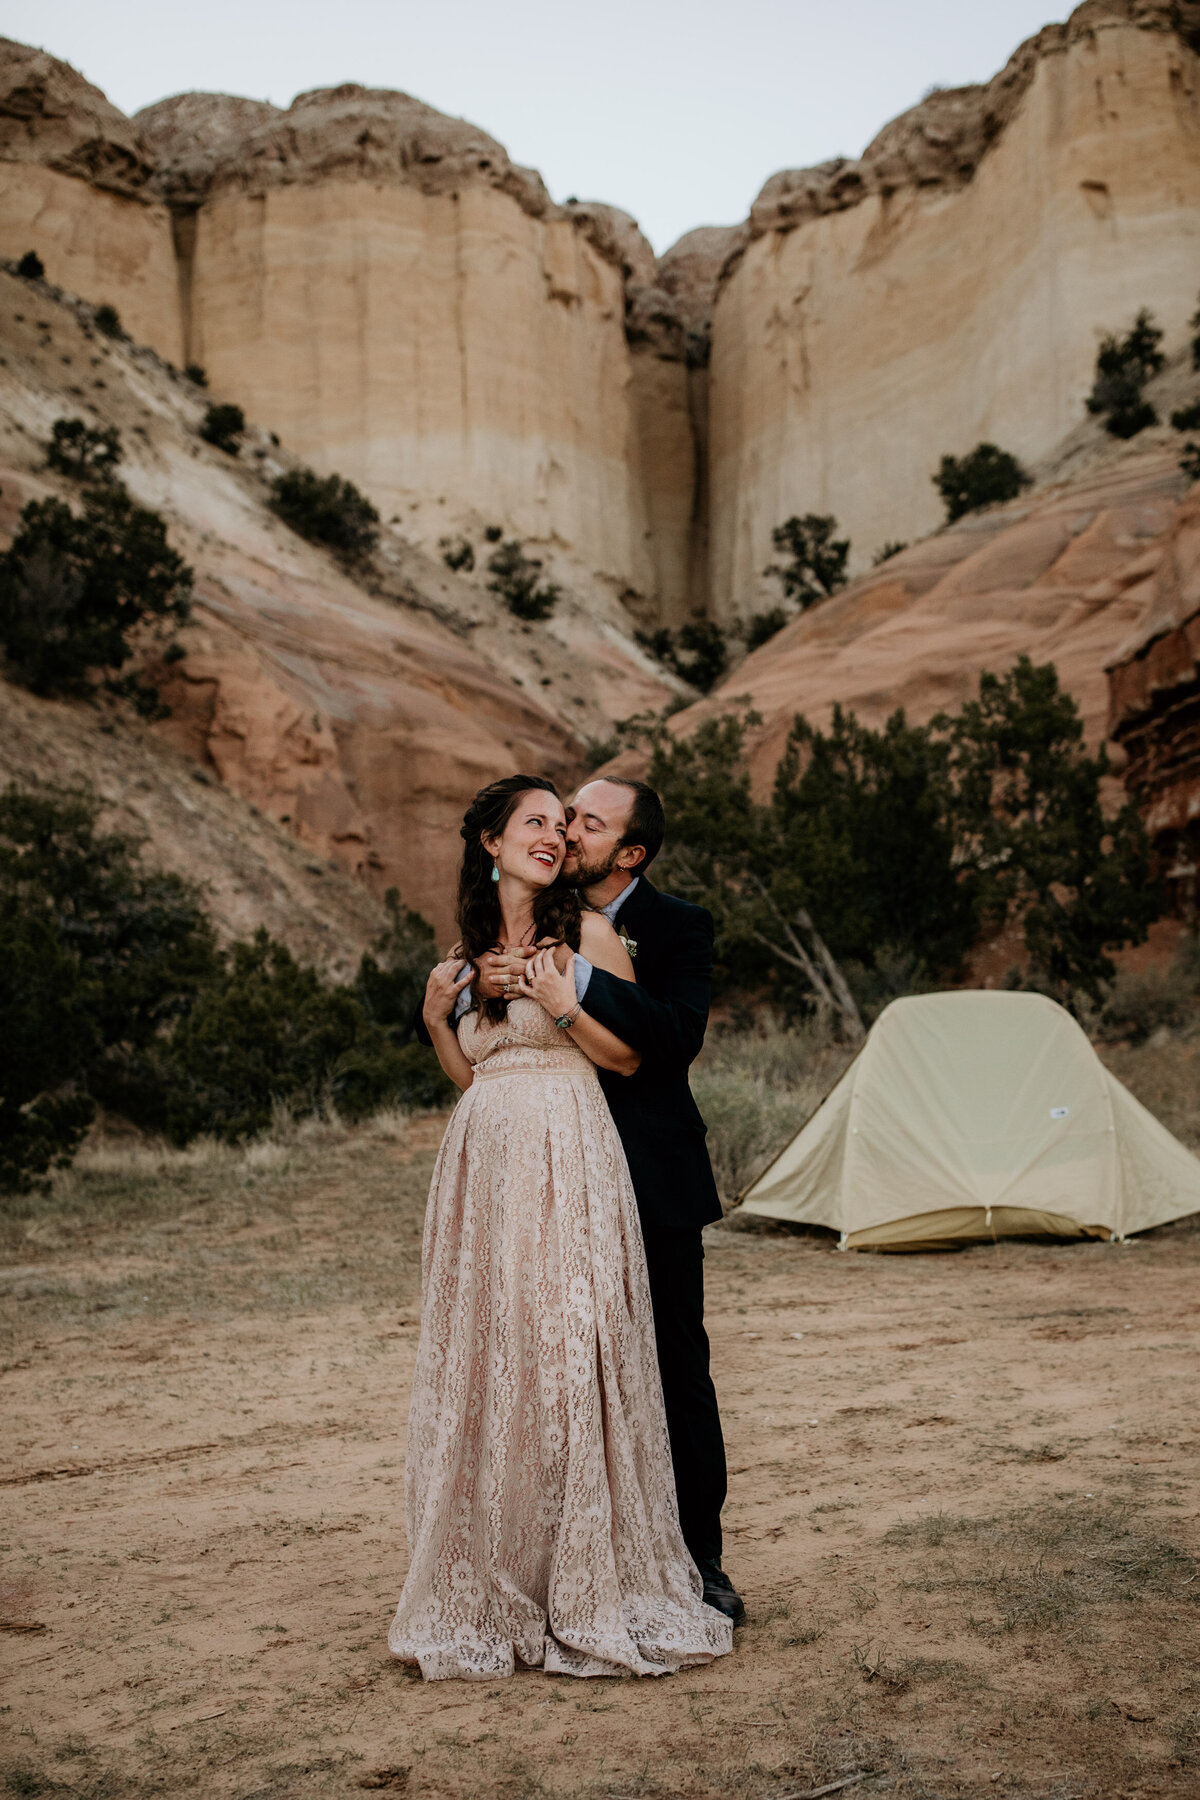 groom kissing bride at campsite in front of a desert canyon